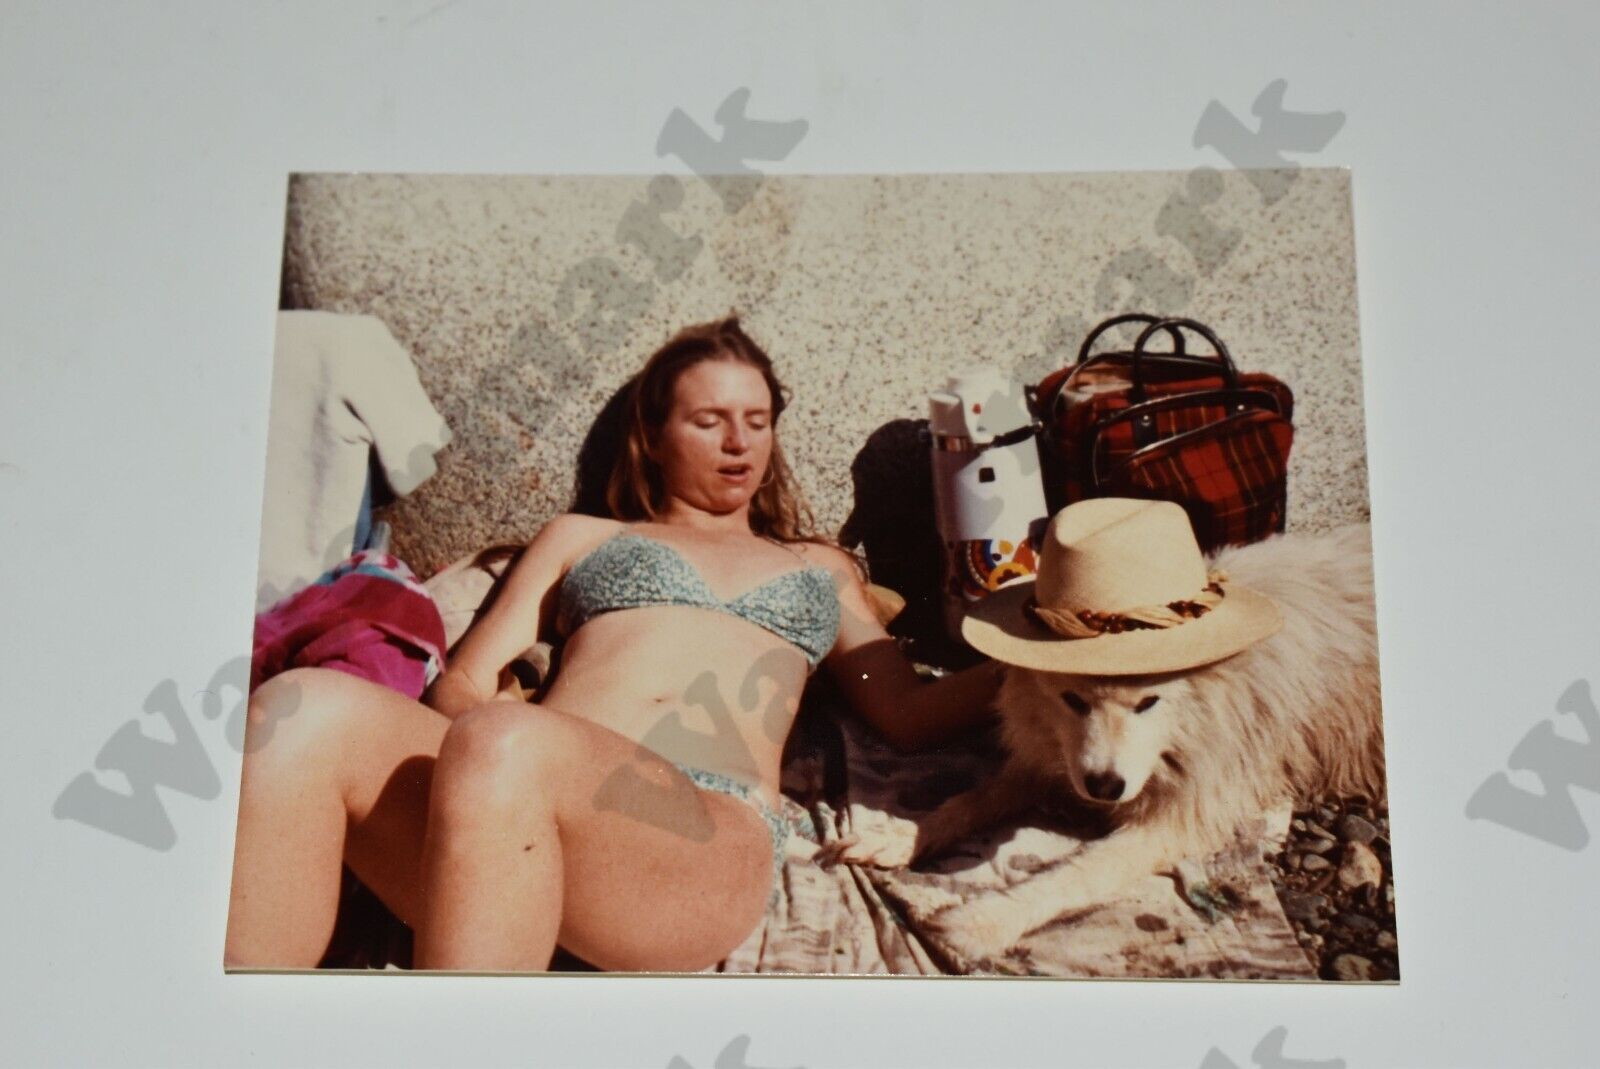 curvy woman in bikini playing with dog candid VINTAGE PHOTOGRAPH  Gt